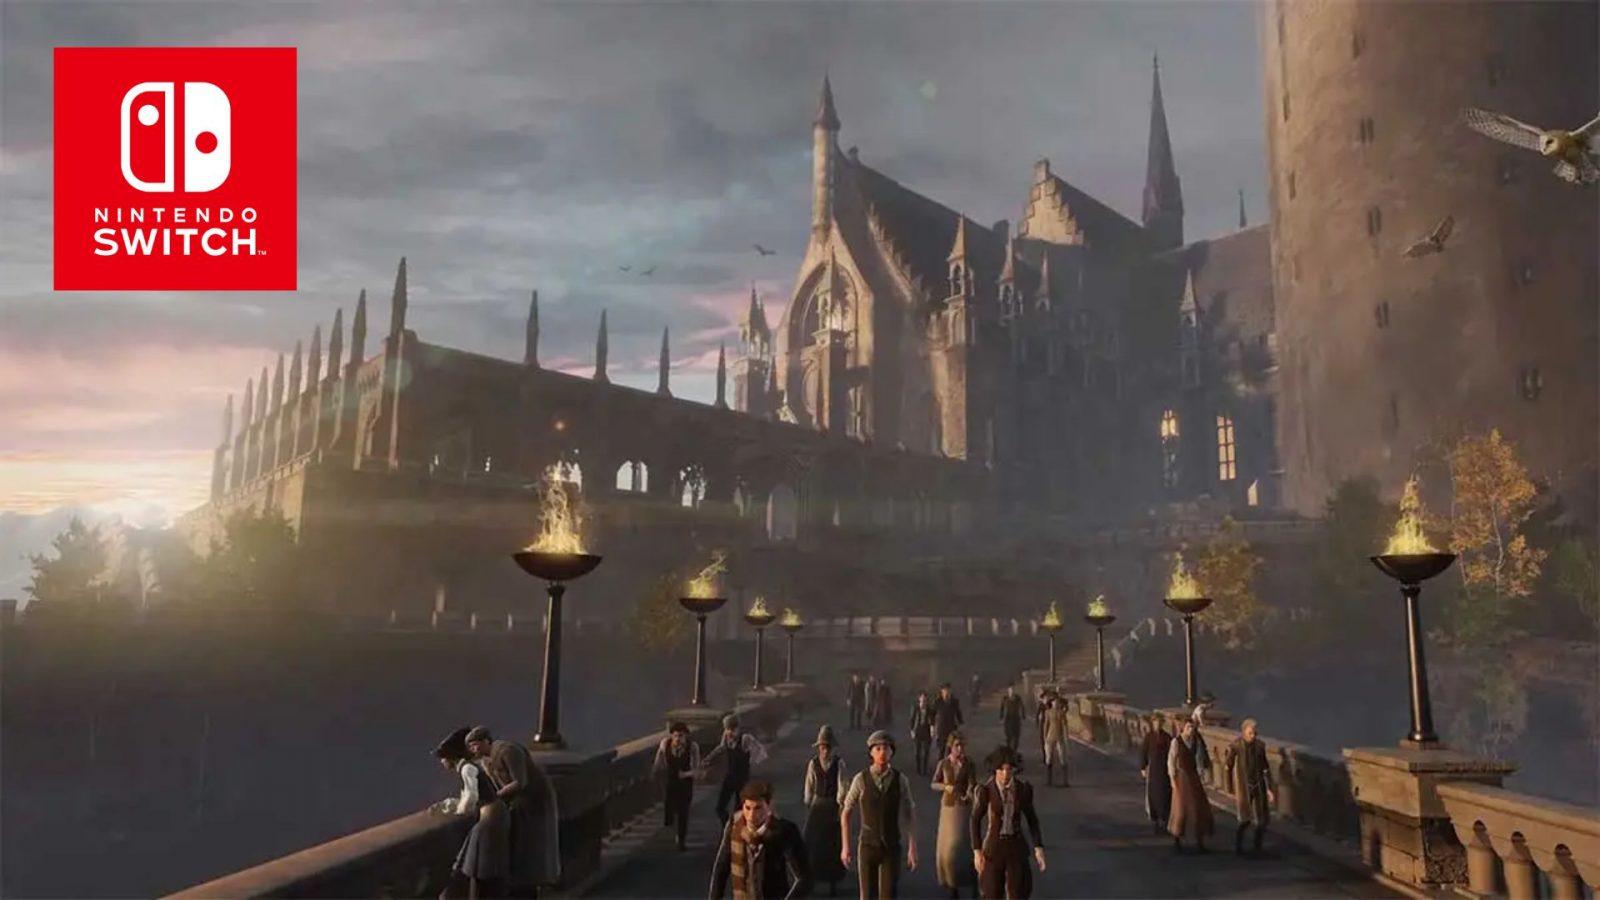 Hogwarts Legacy PS4 and Xbox One version delayed, new date confirmed